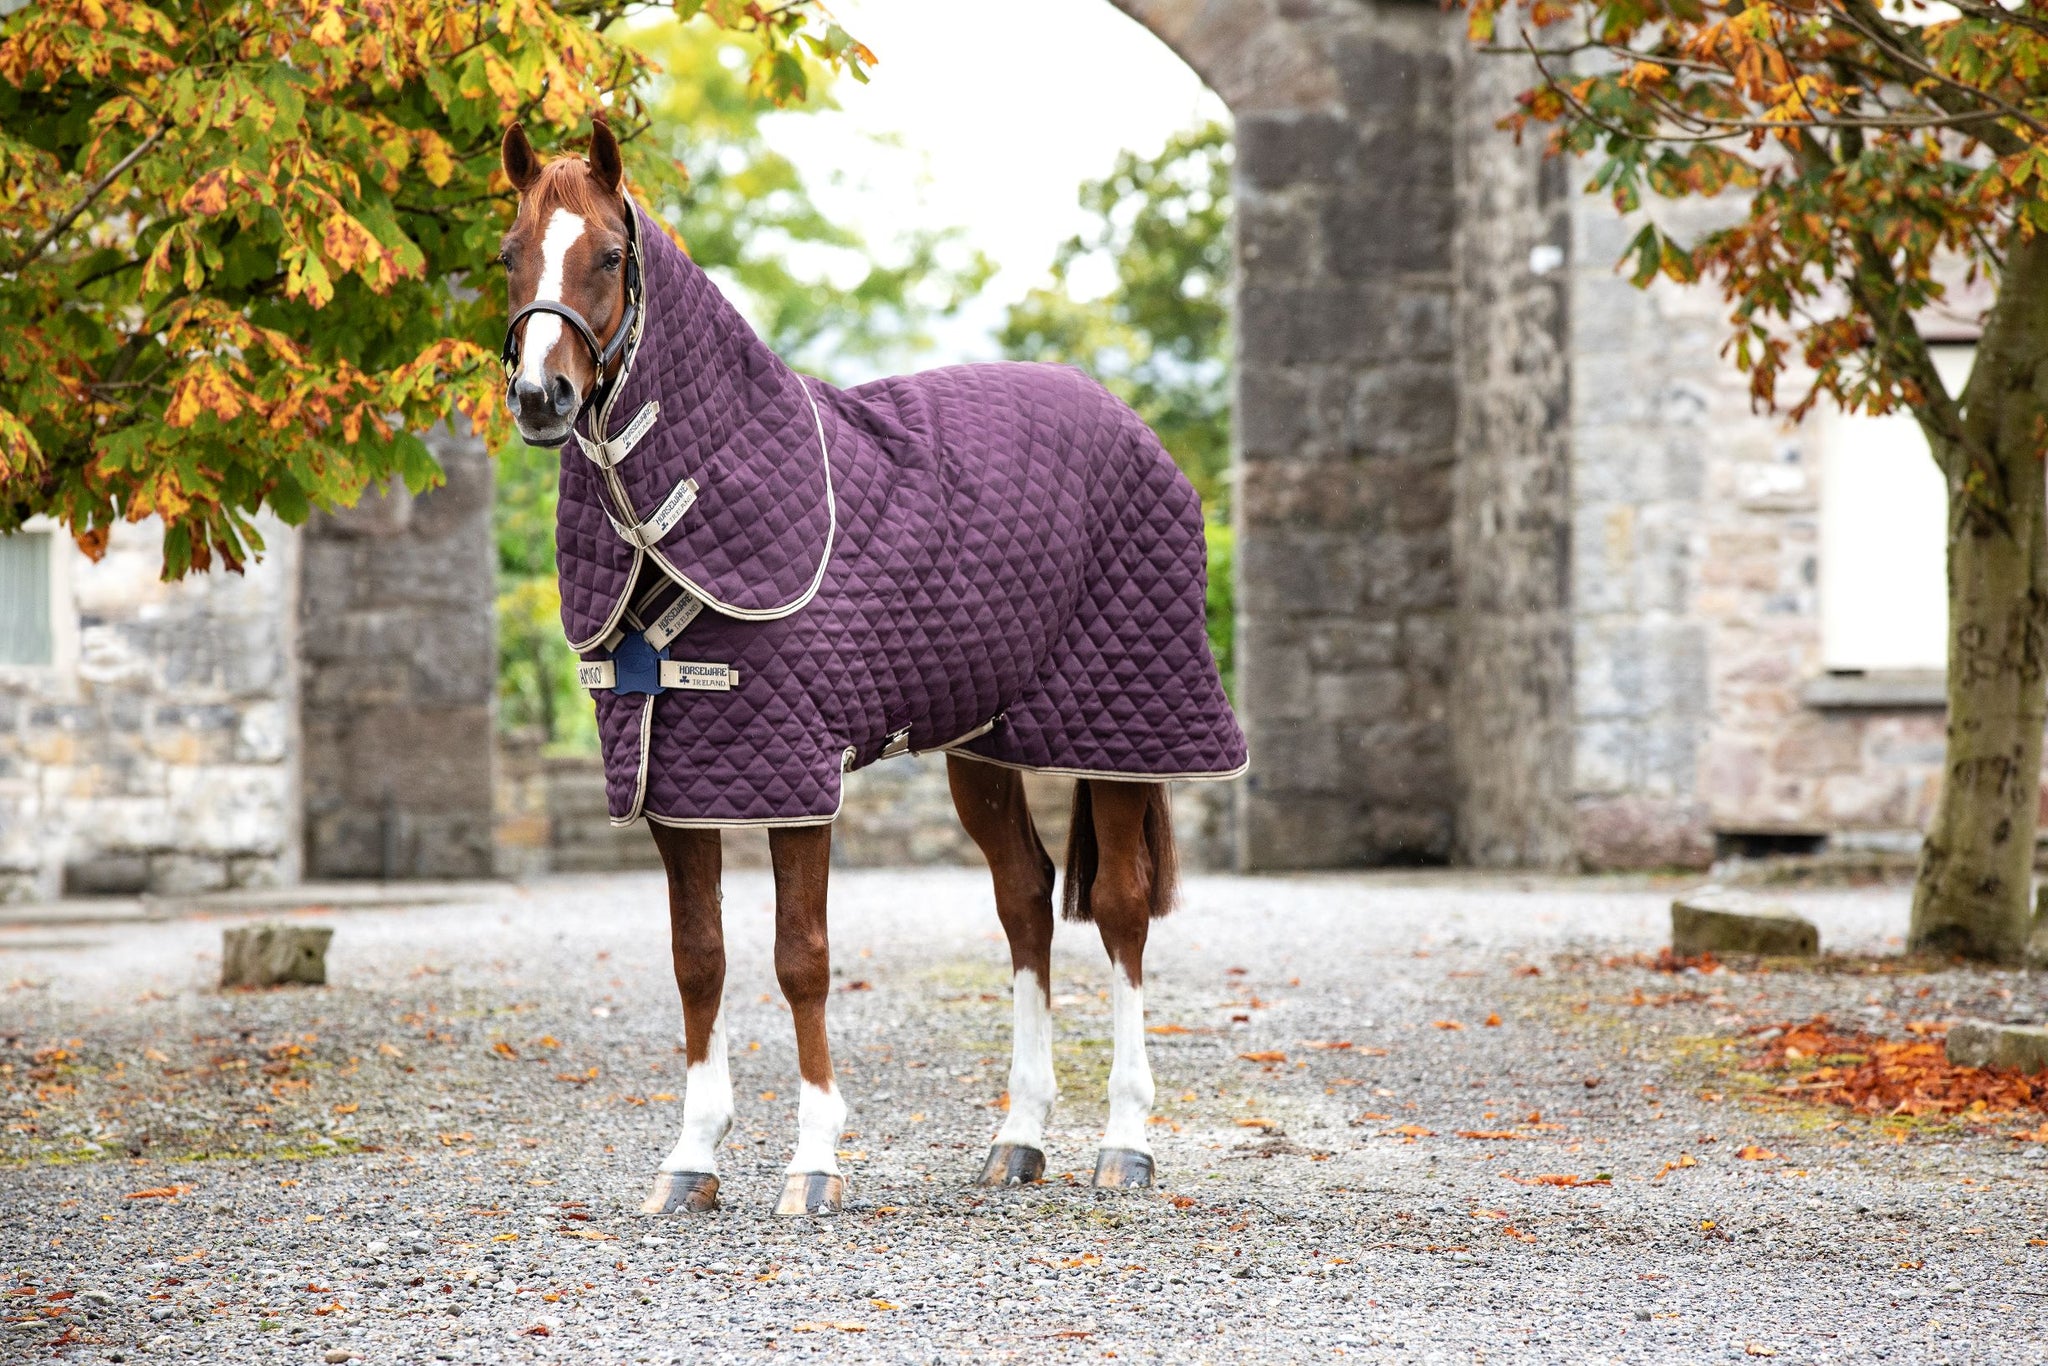 Equine Wear - Summerside Tack and Equestrian Wear